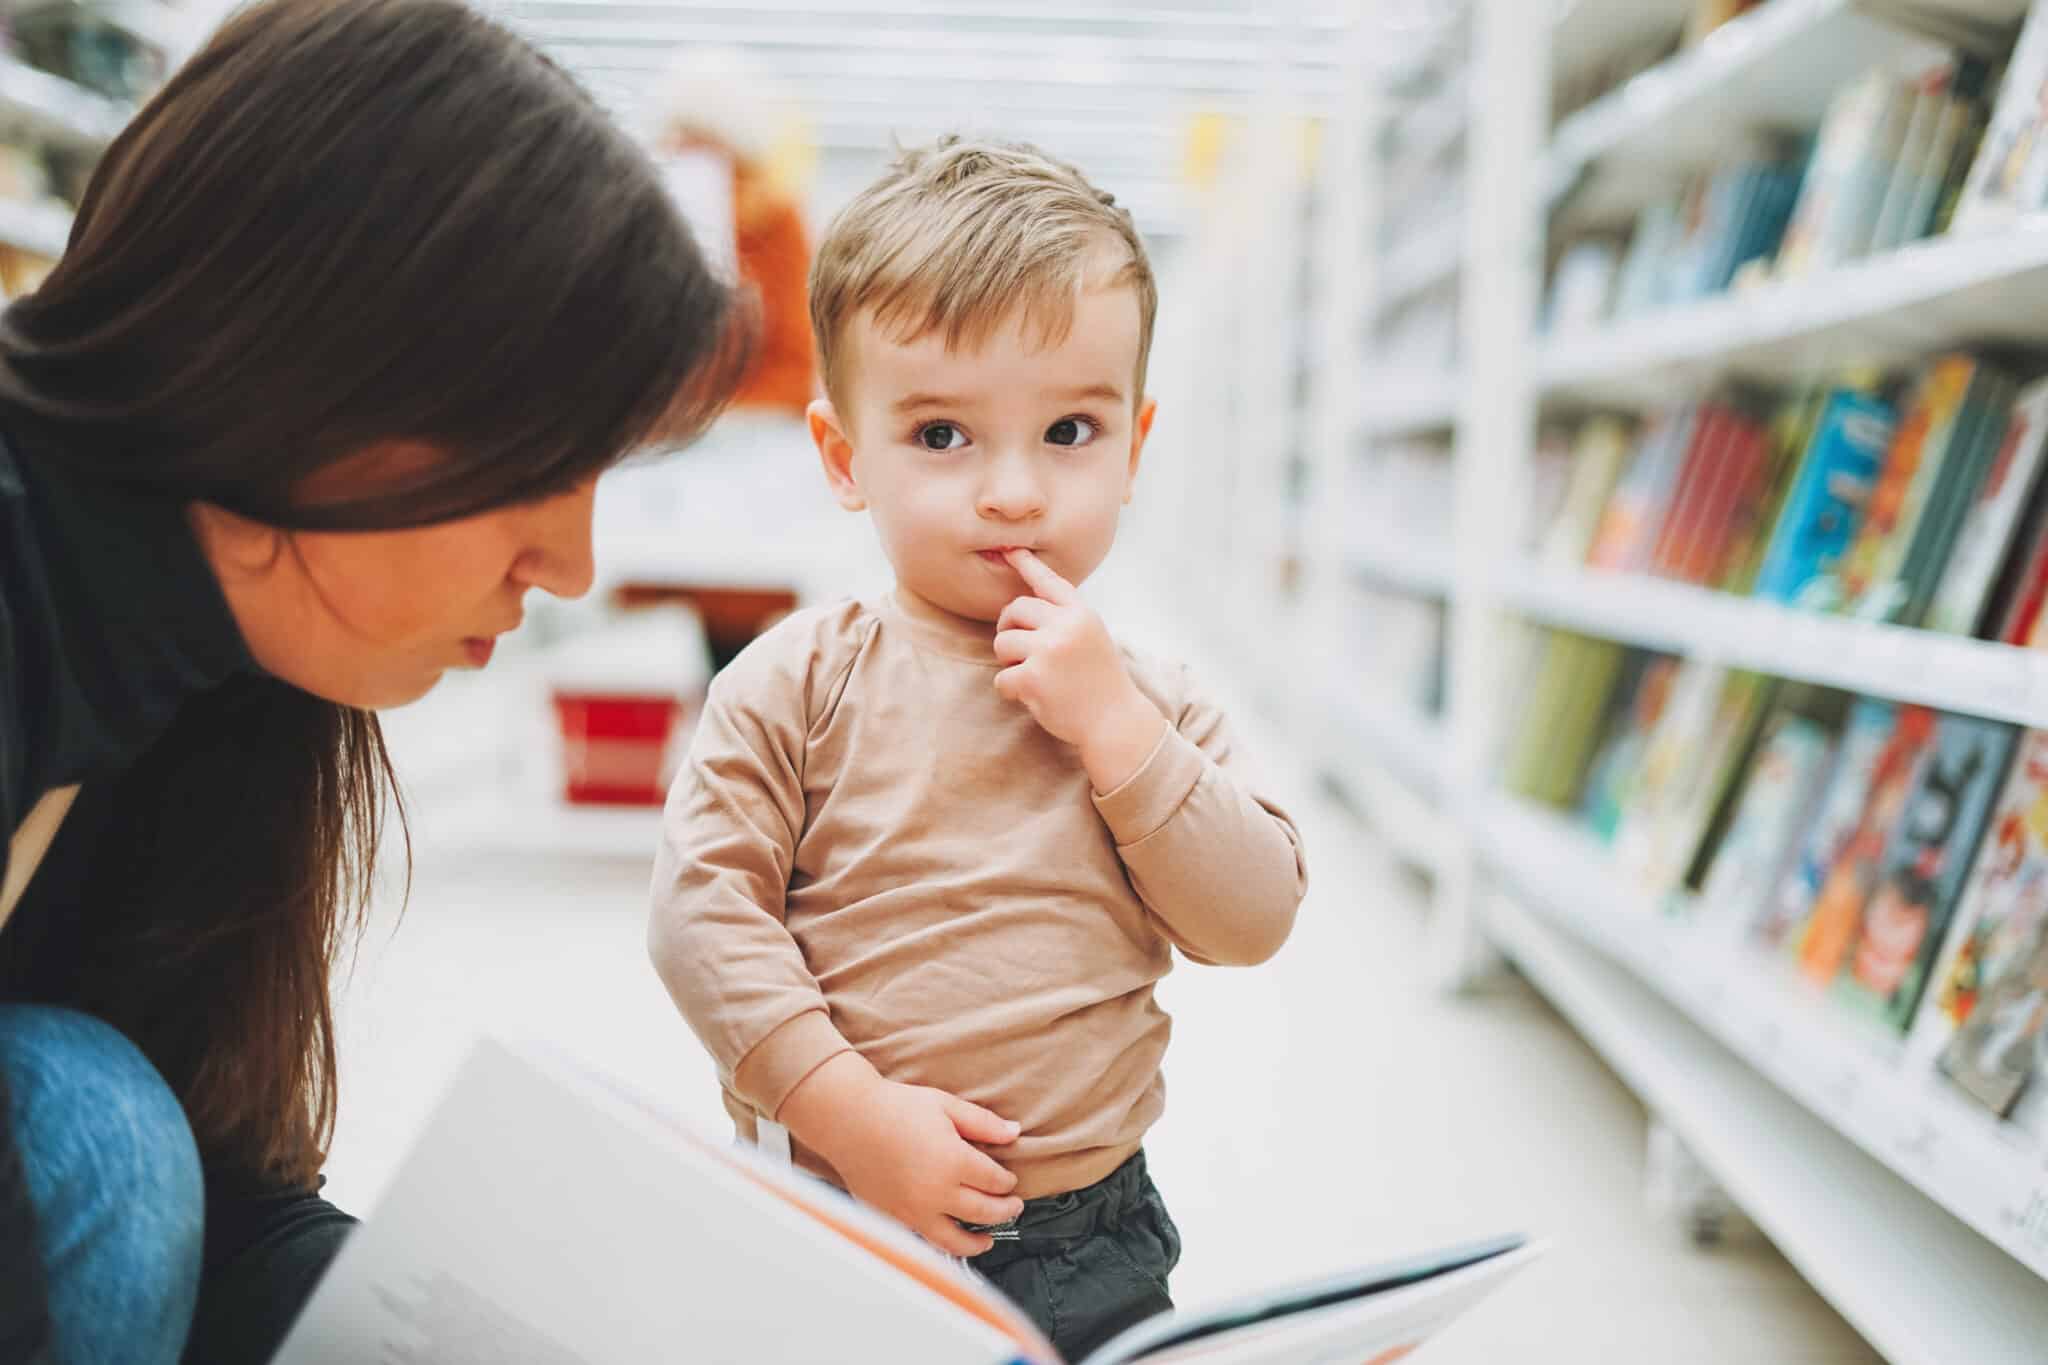 mother and child in book store looking at book